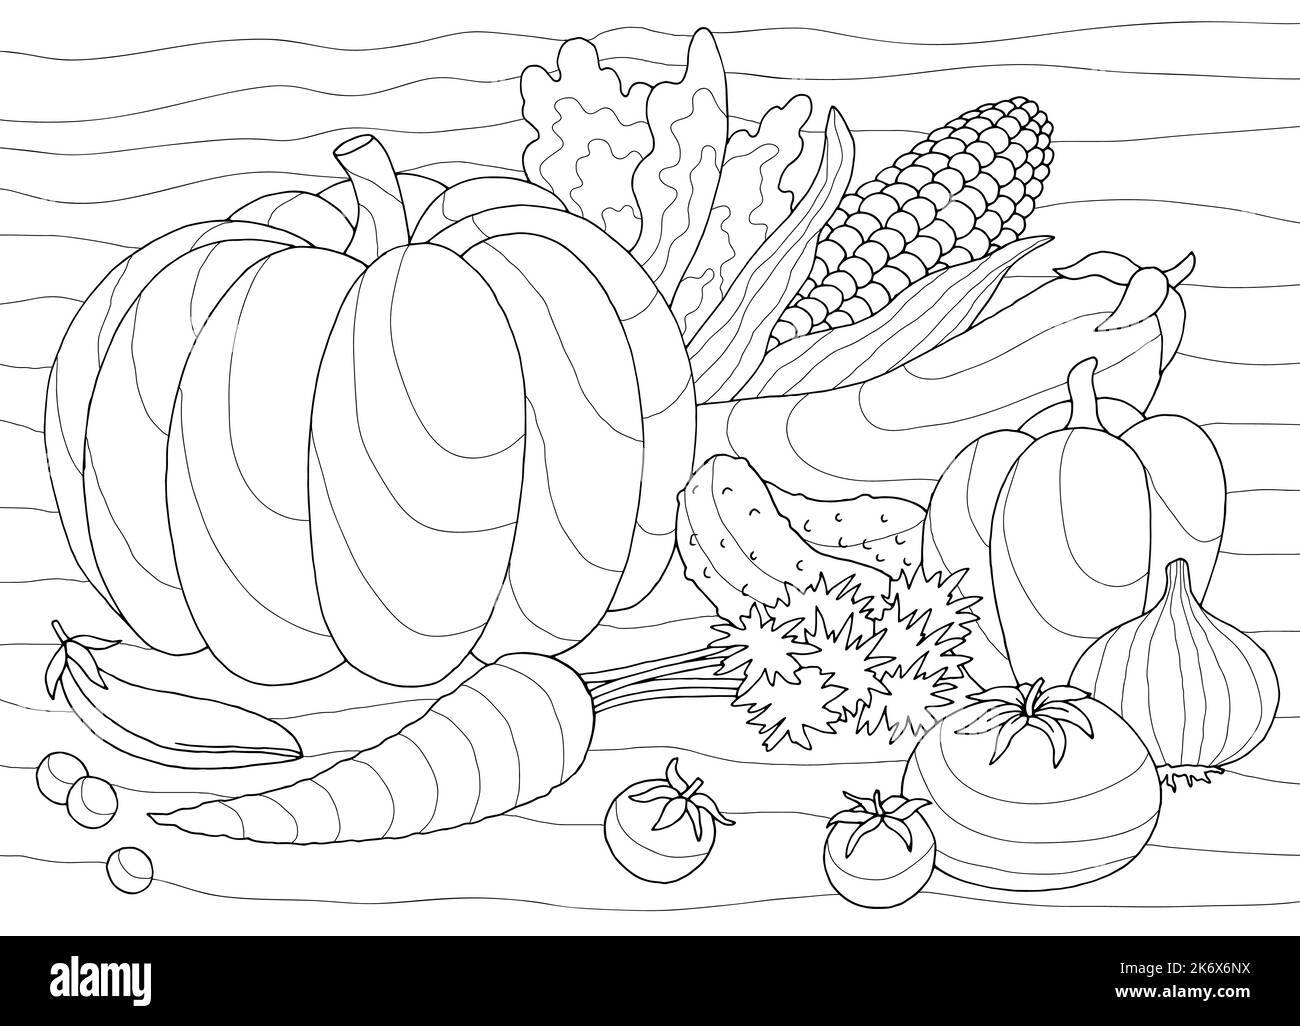 Vegetable coloring graphic black white sketch illustration vector Stock Vector